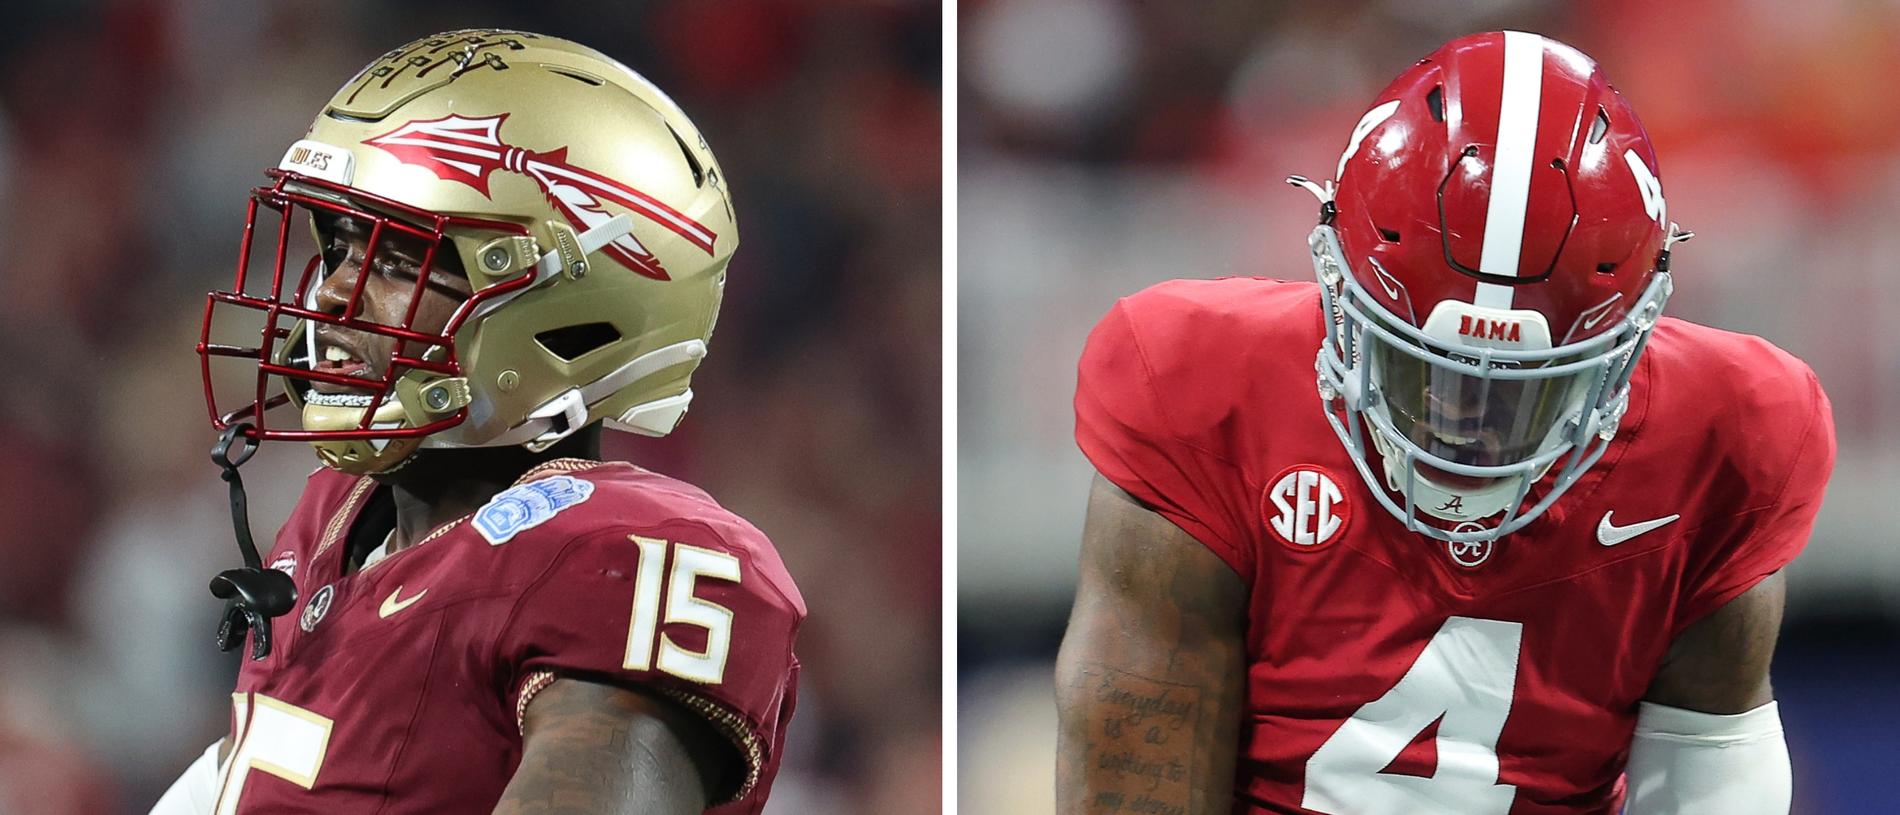 Florida State was snubbed in the College Football Playoff race for Alabama.